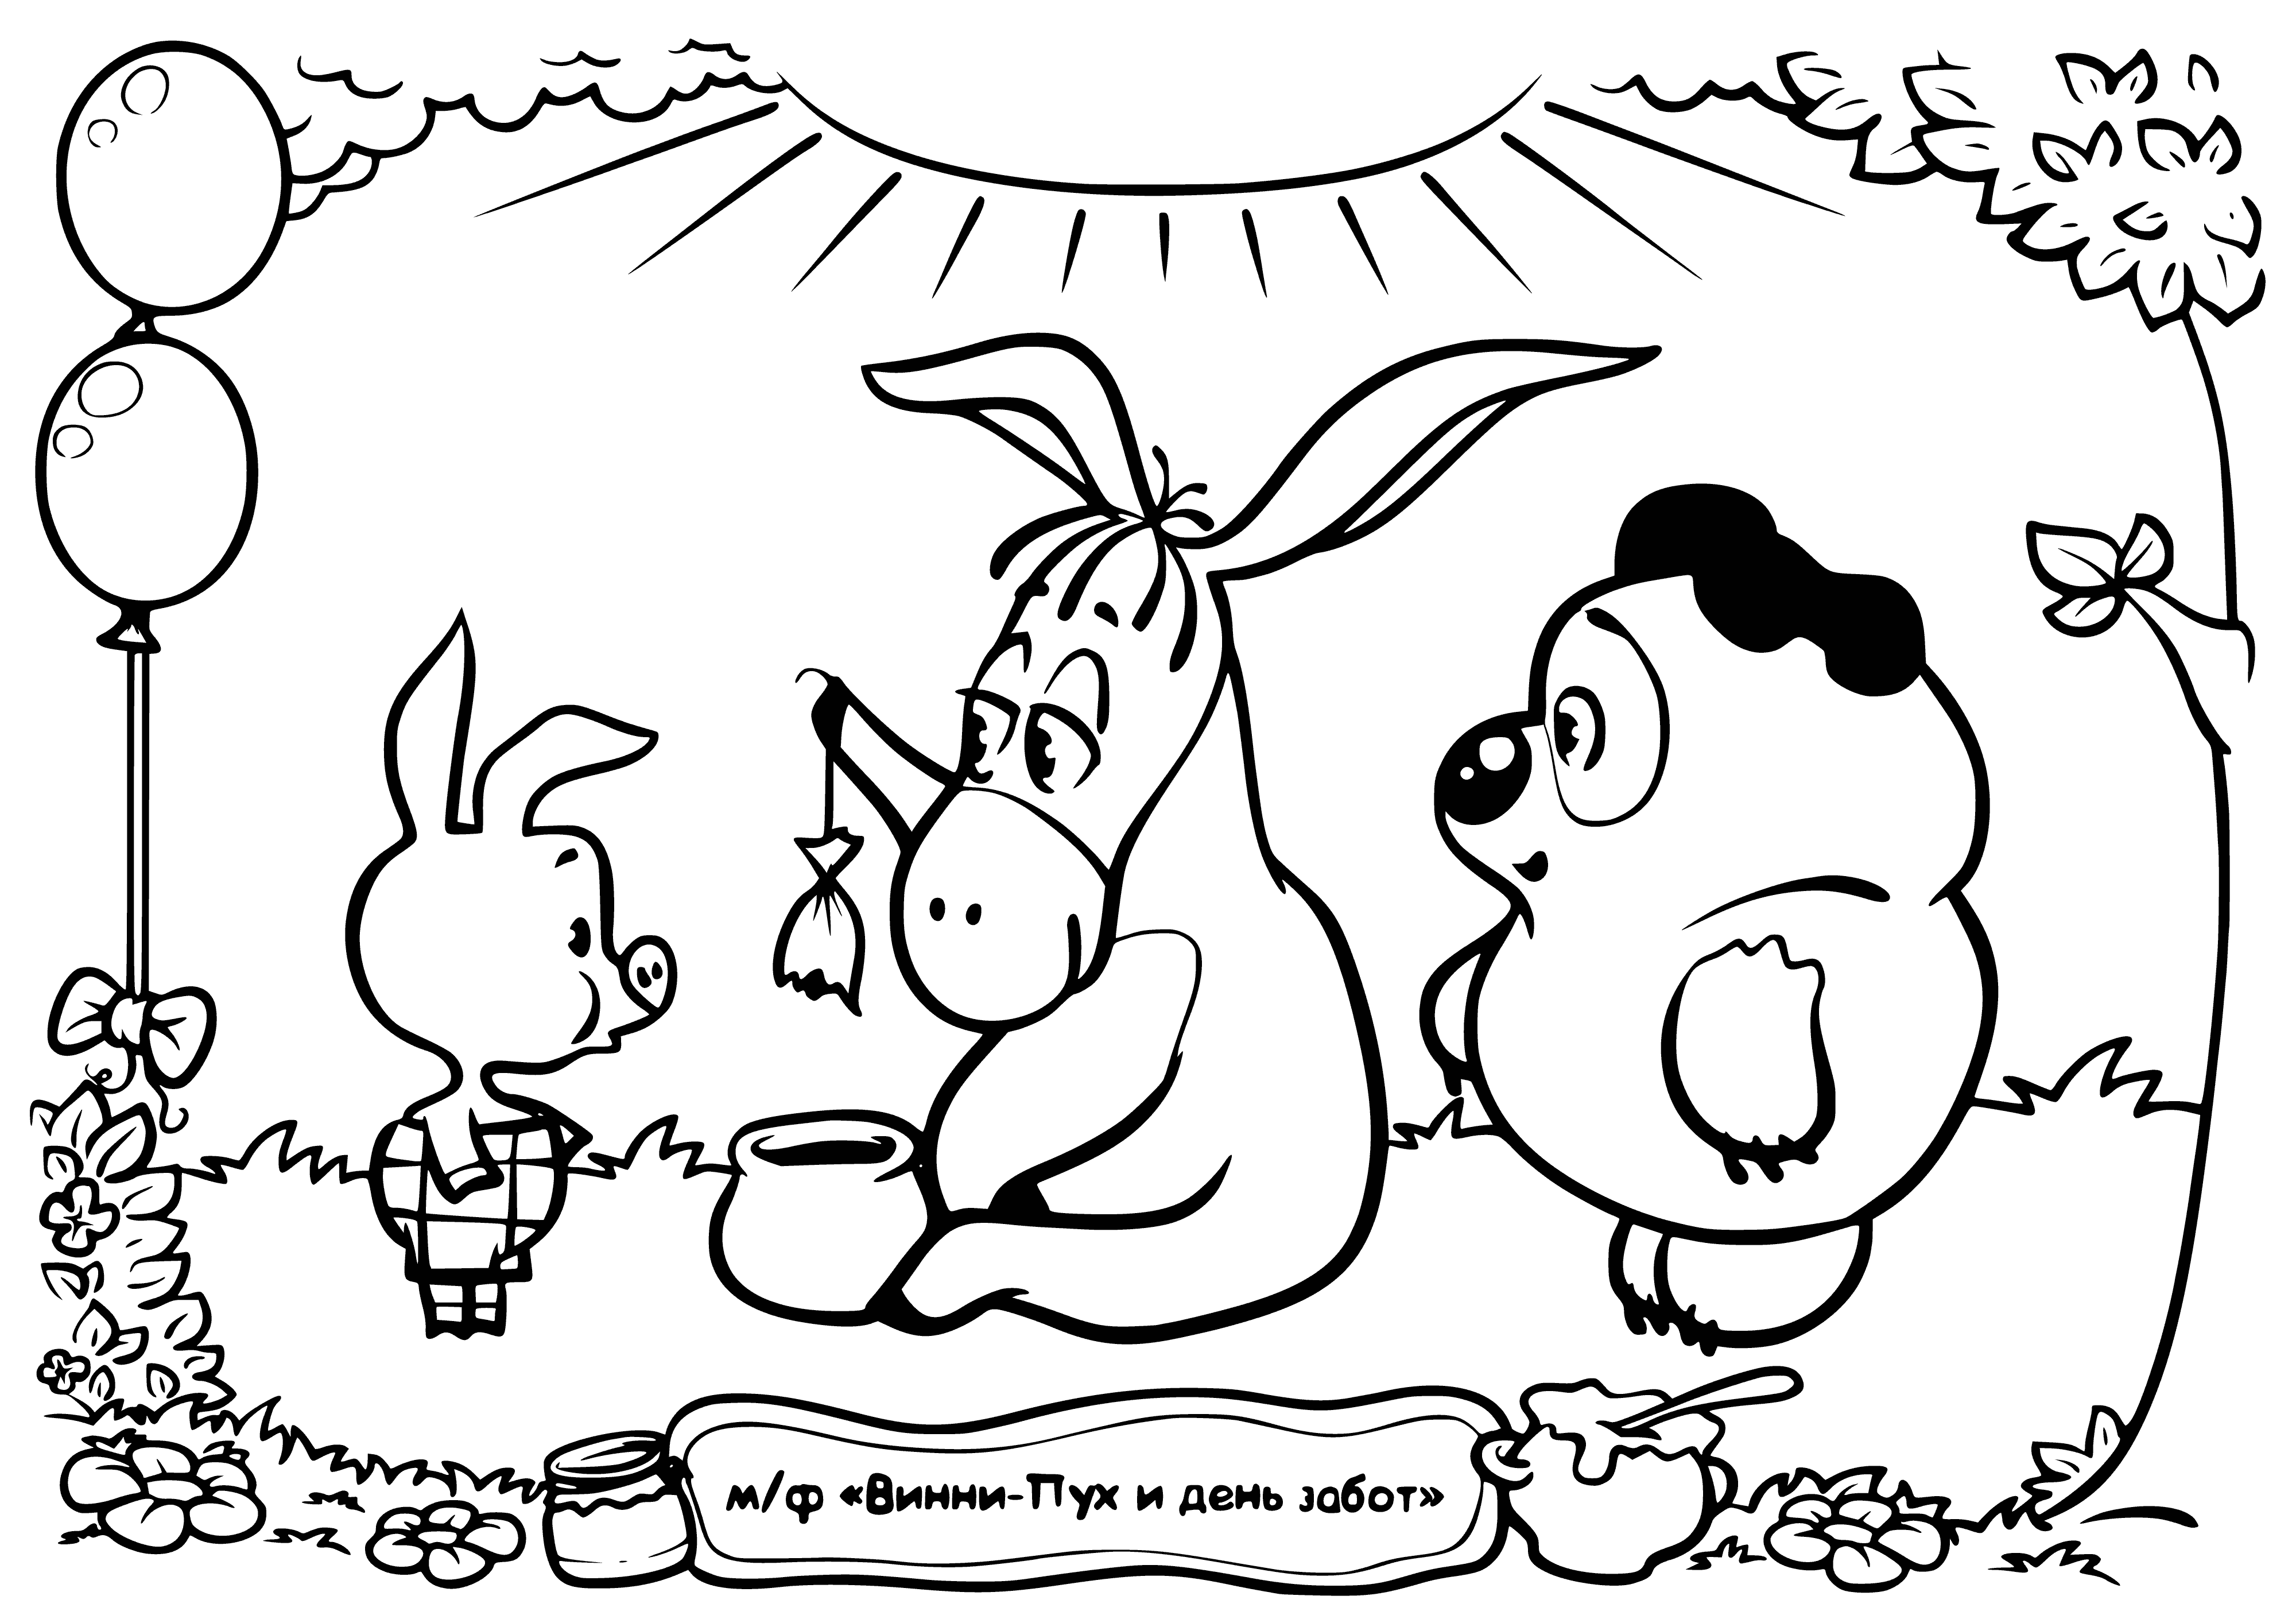 coloring page: Piglet offers Eeyore a balloon, but Eeyore turns and walks away.